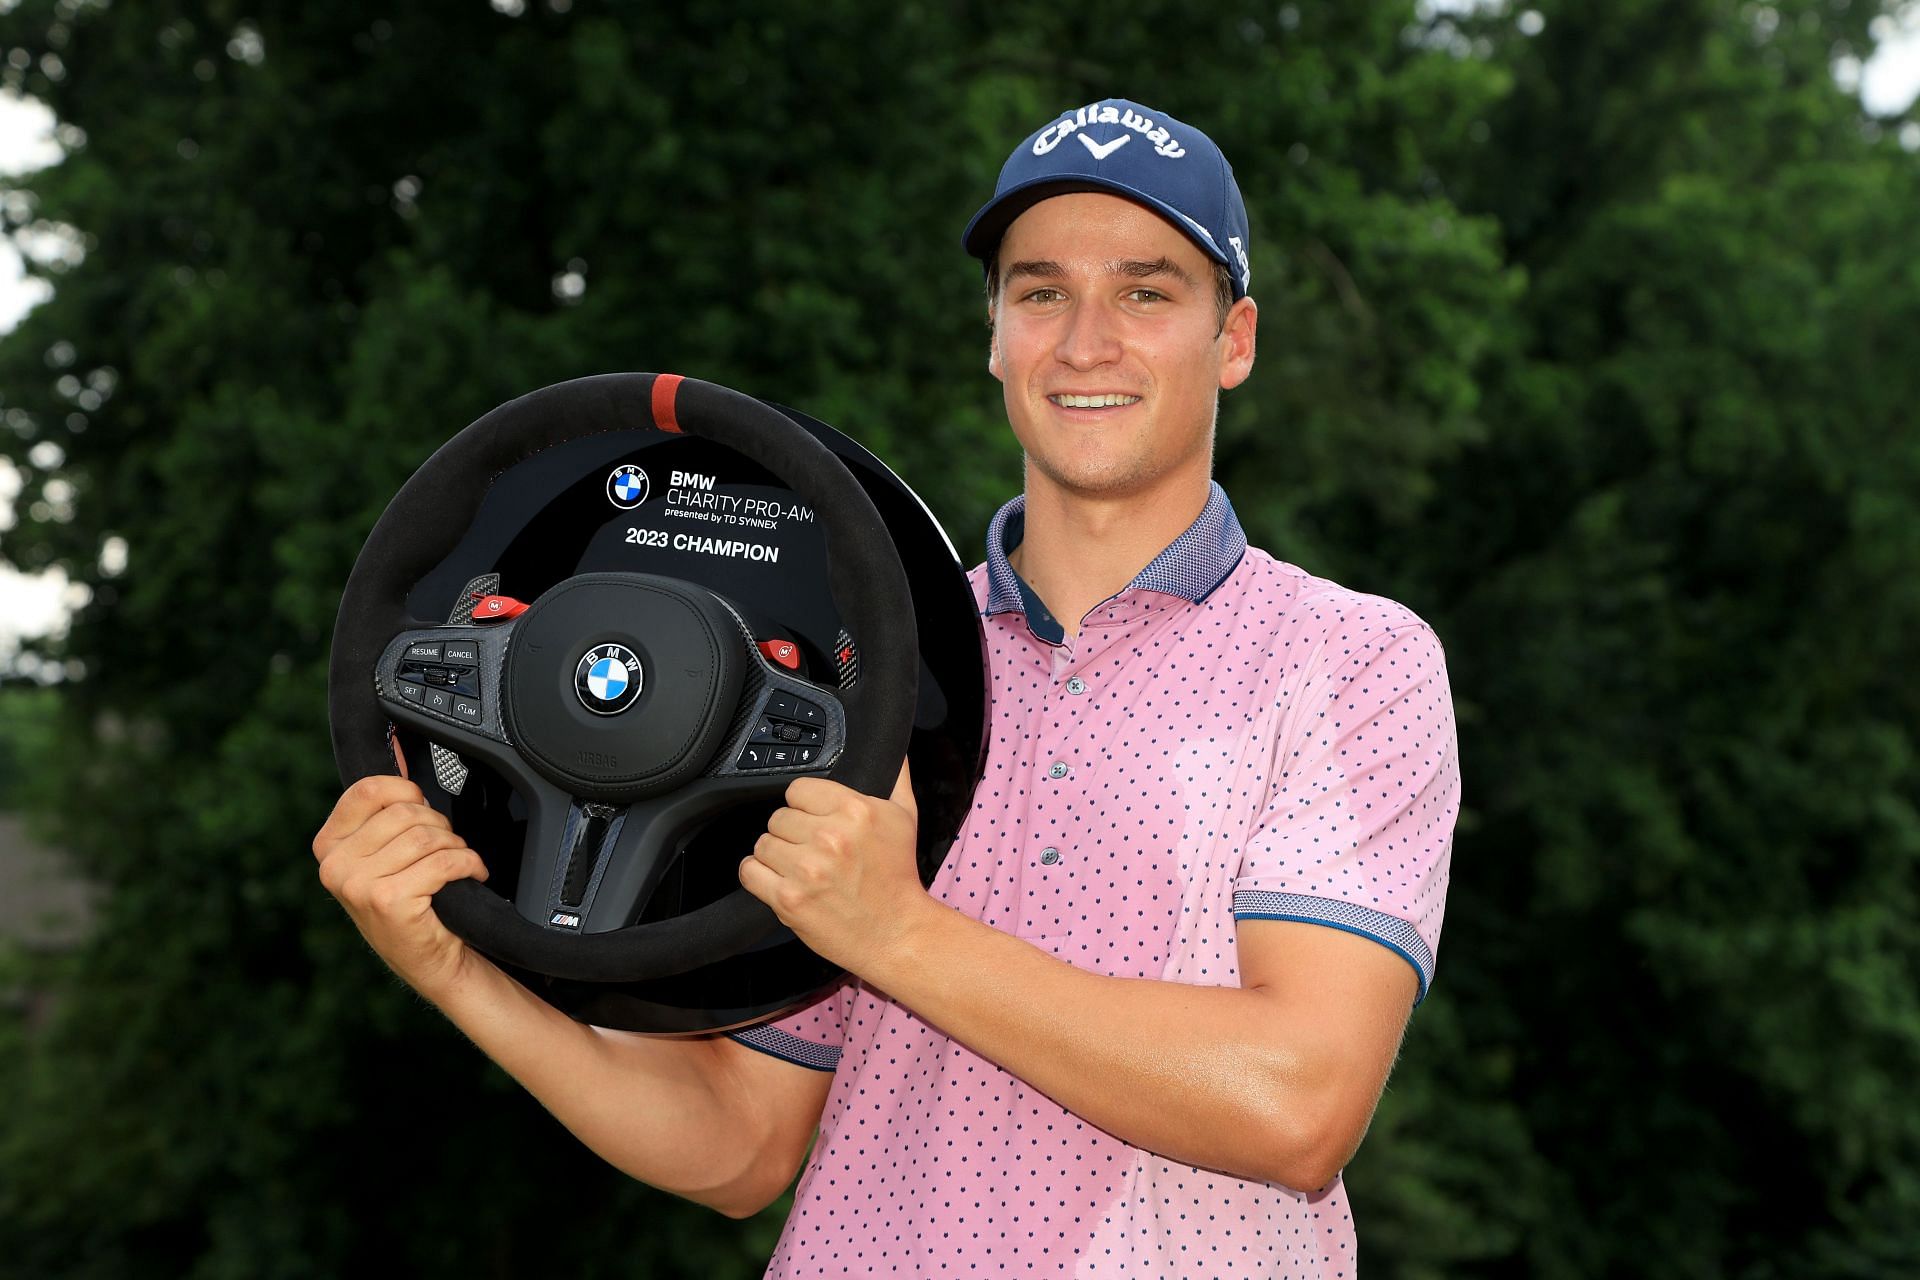 BMW Charity Pro-Am presented by TD SYNNEX - Final Round